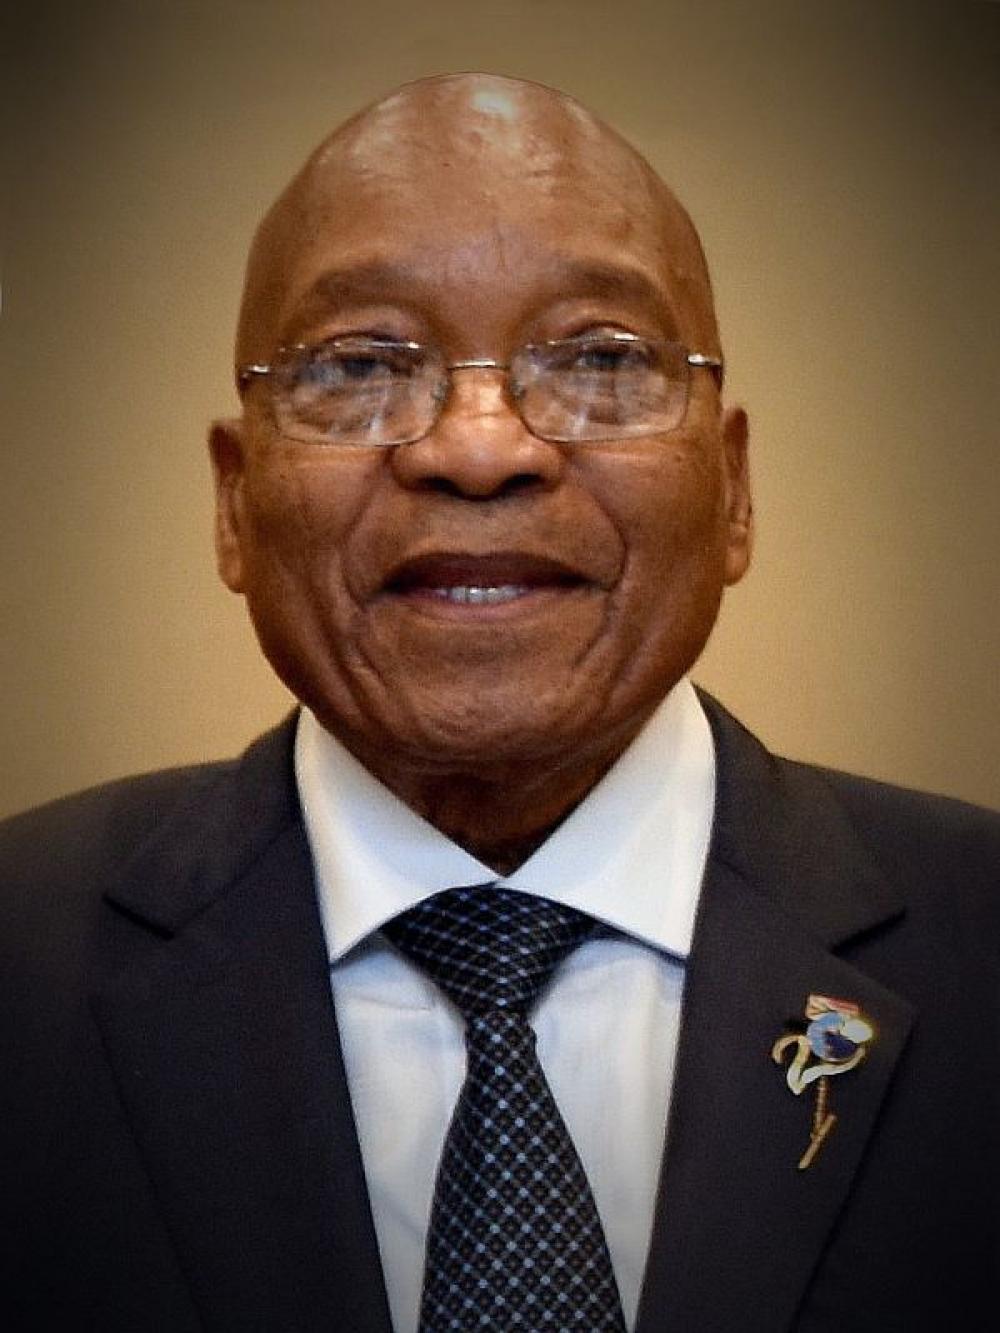 Court agrees to hear former South Africa Prez Jacob Zuma's plea challenging jail term